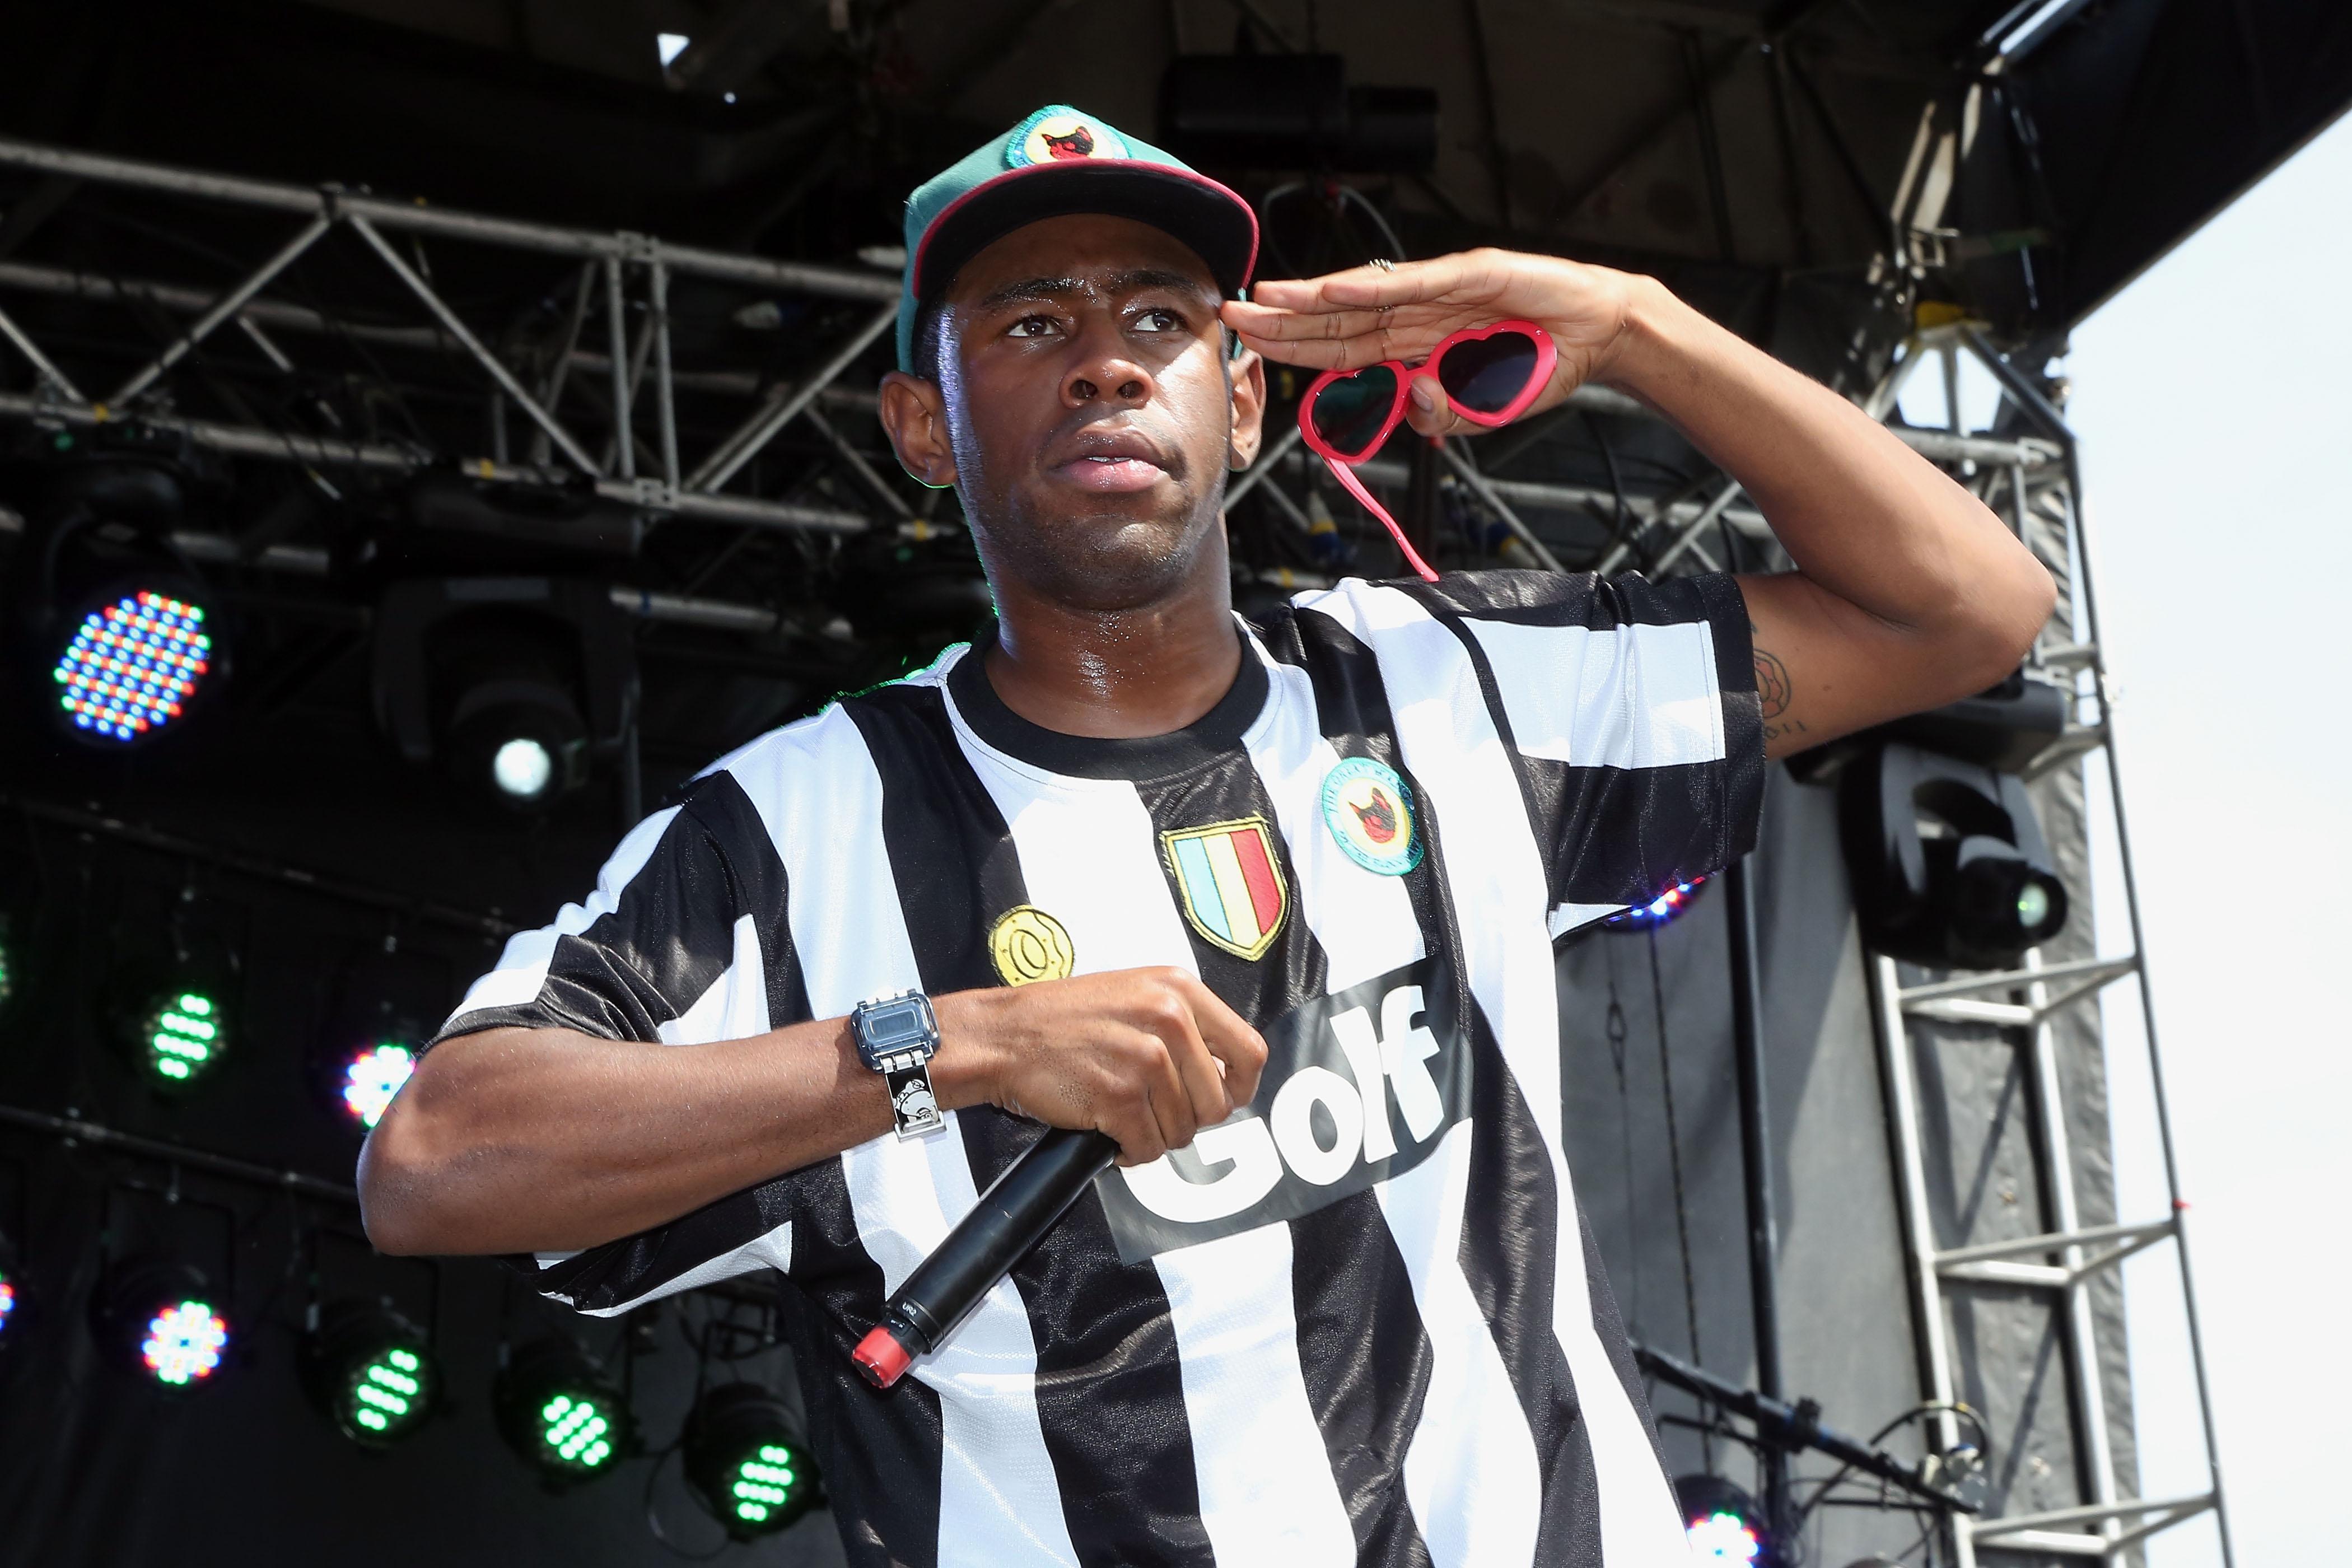 tyler the creator’s lgbt comments are seriously offensive